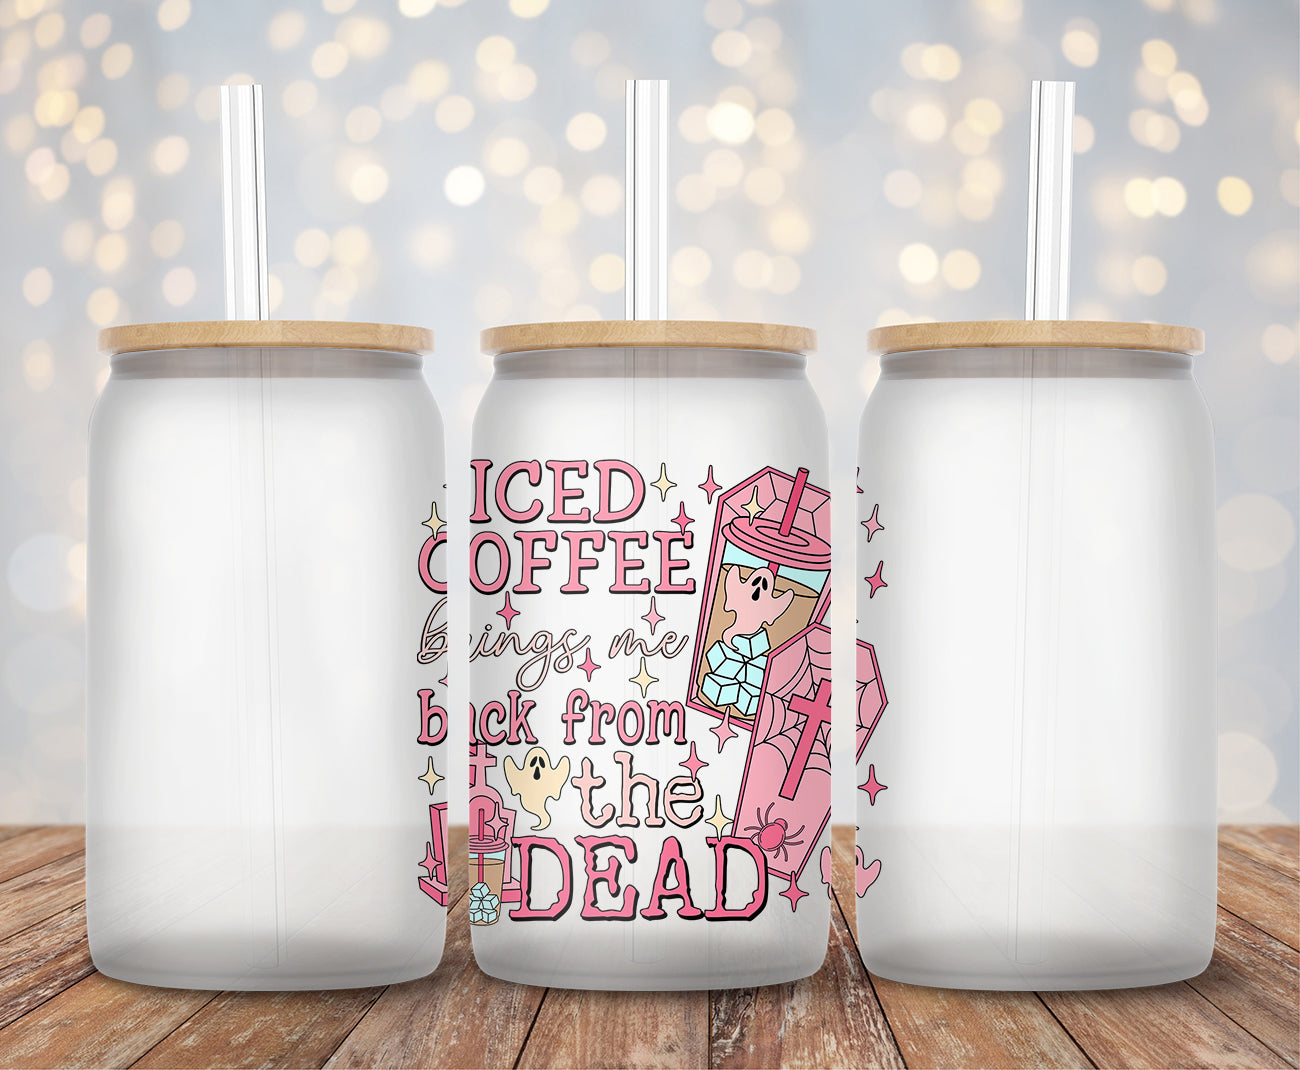 Iced Coffee back from the Dead - Decal